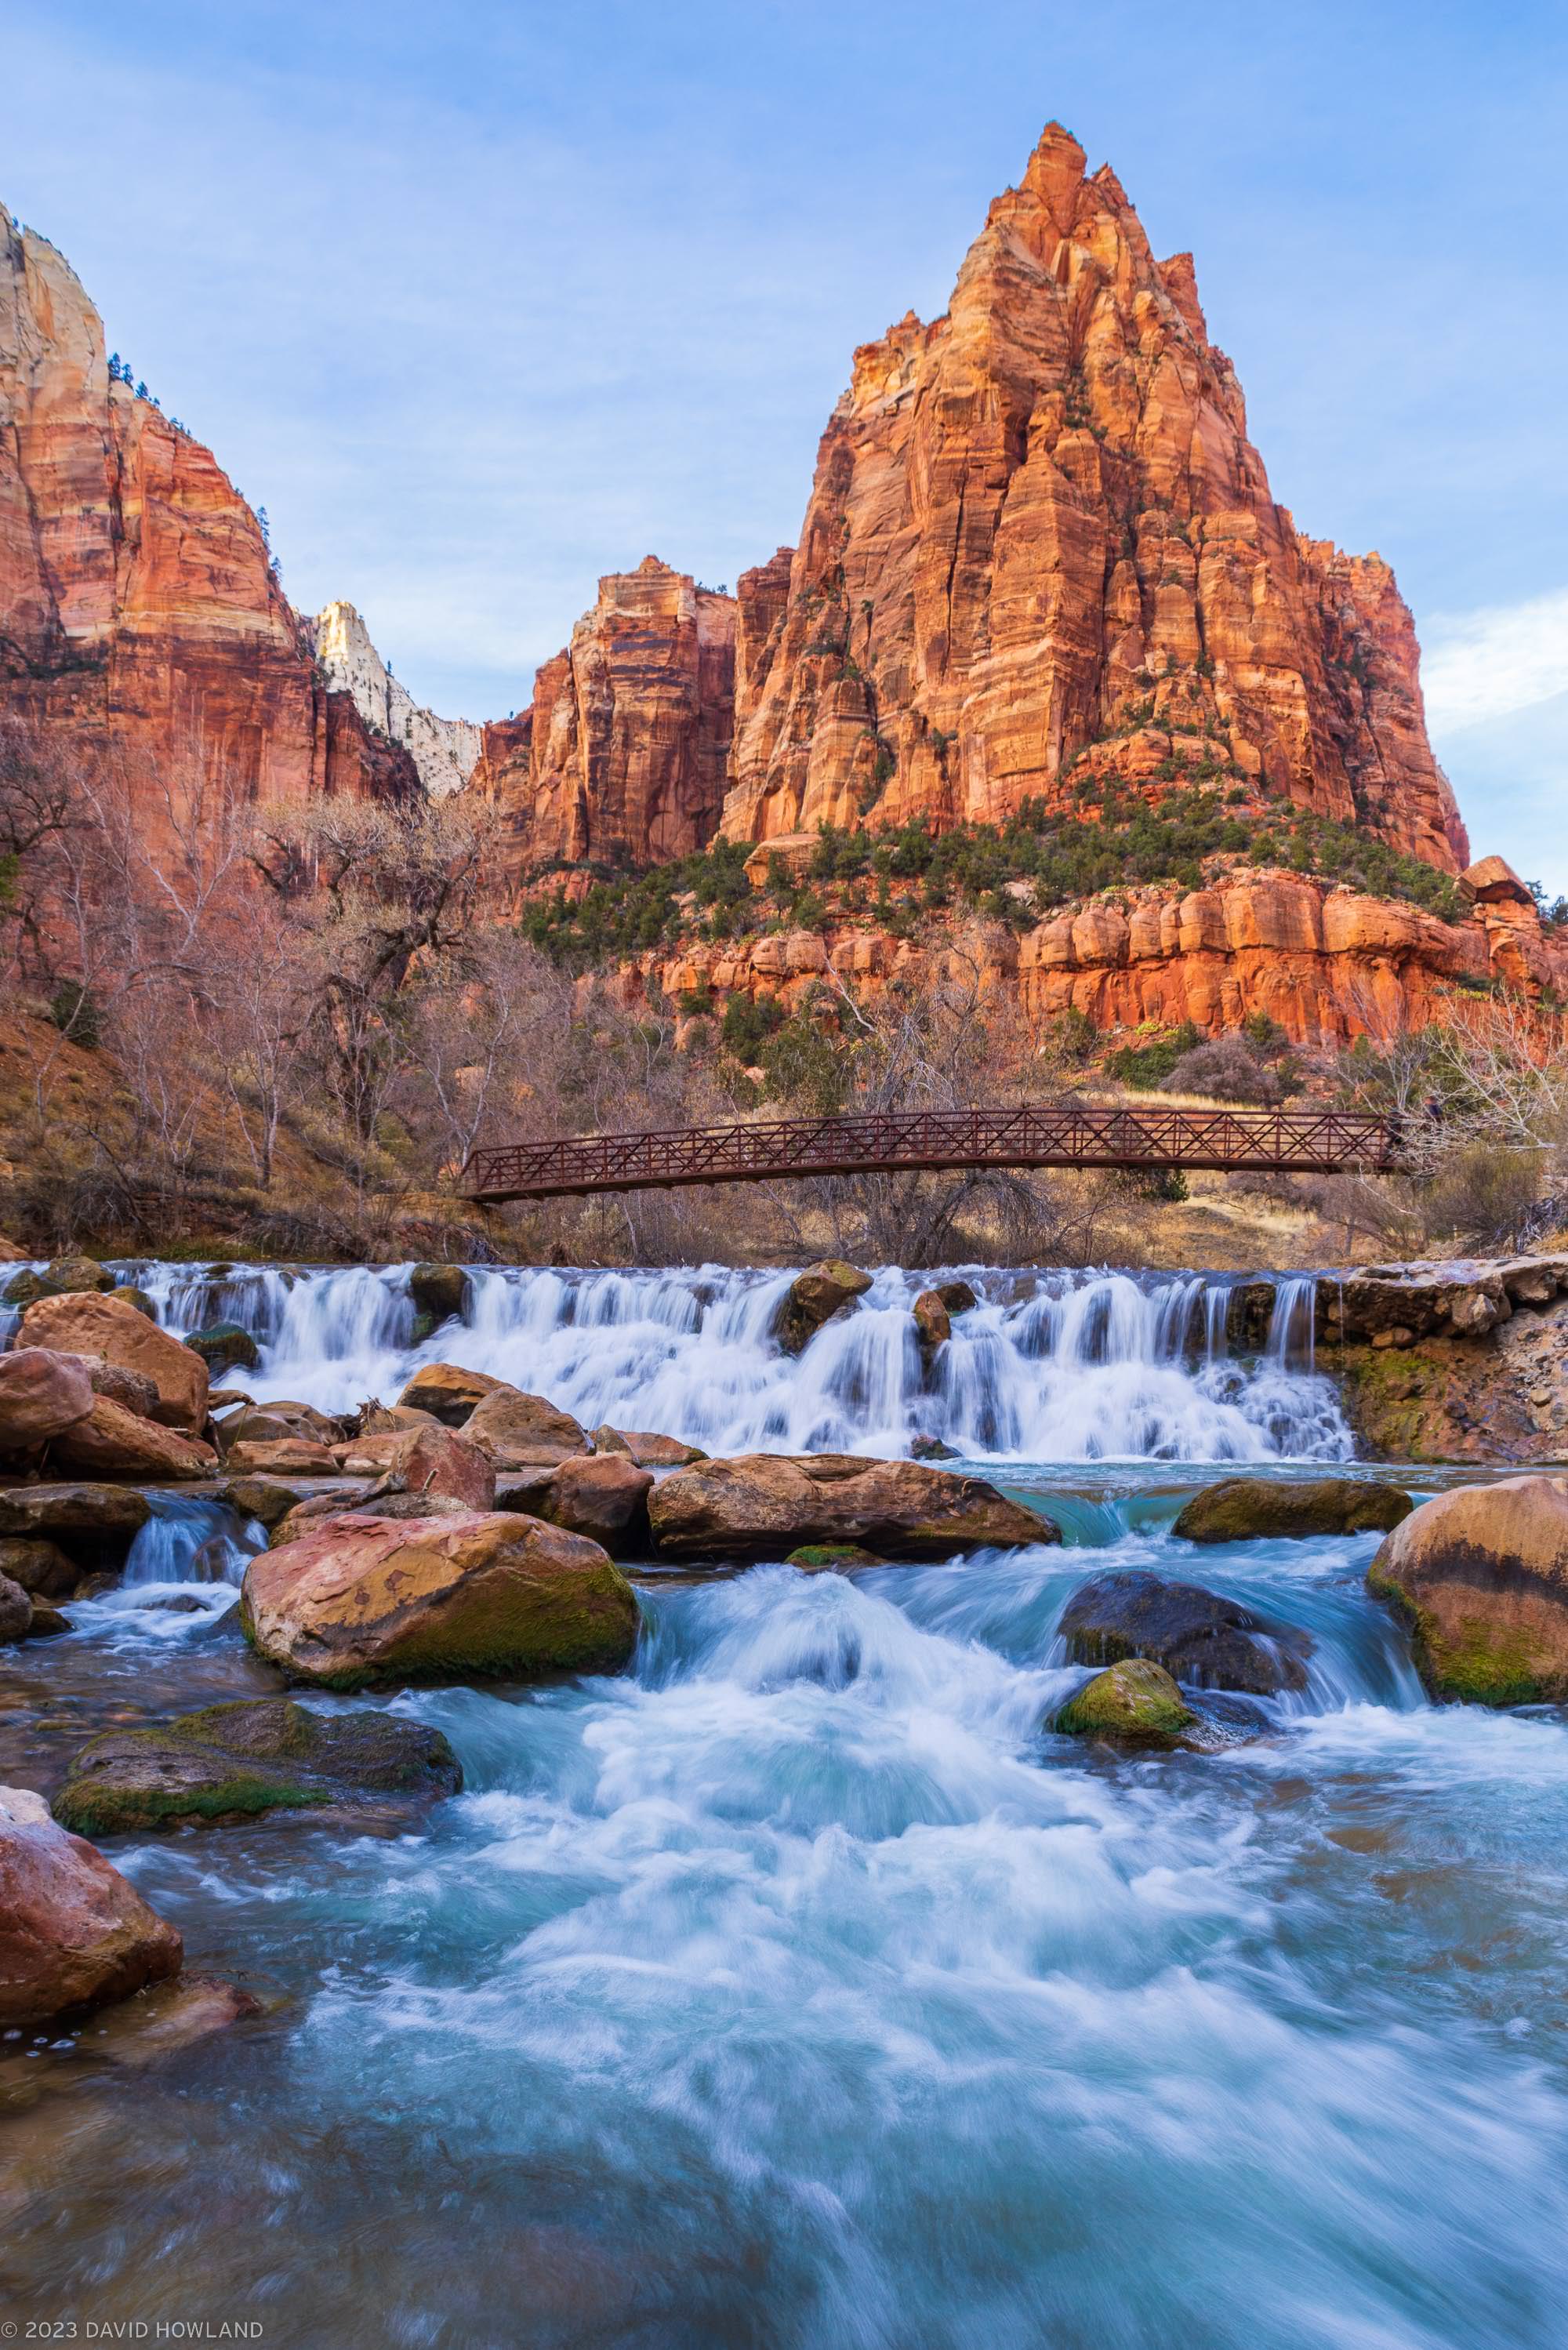 A photo of a waterfall in front of the towering rock walls of Zion National Park in Utah.